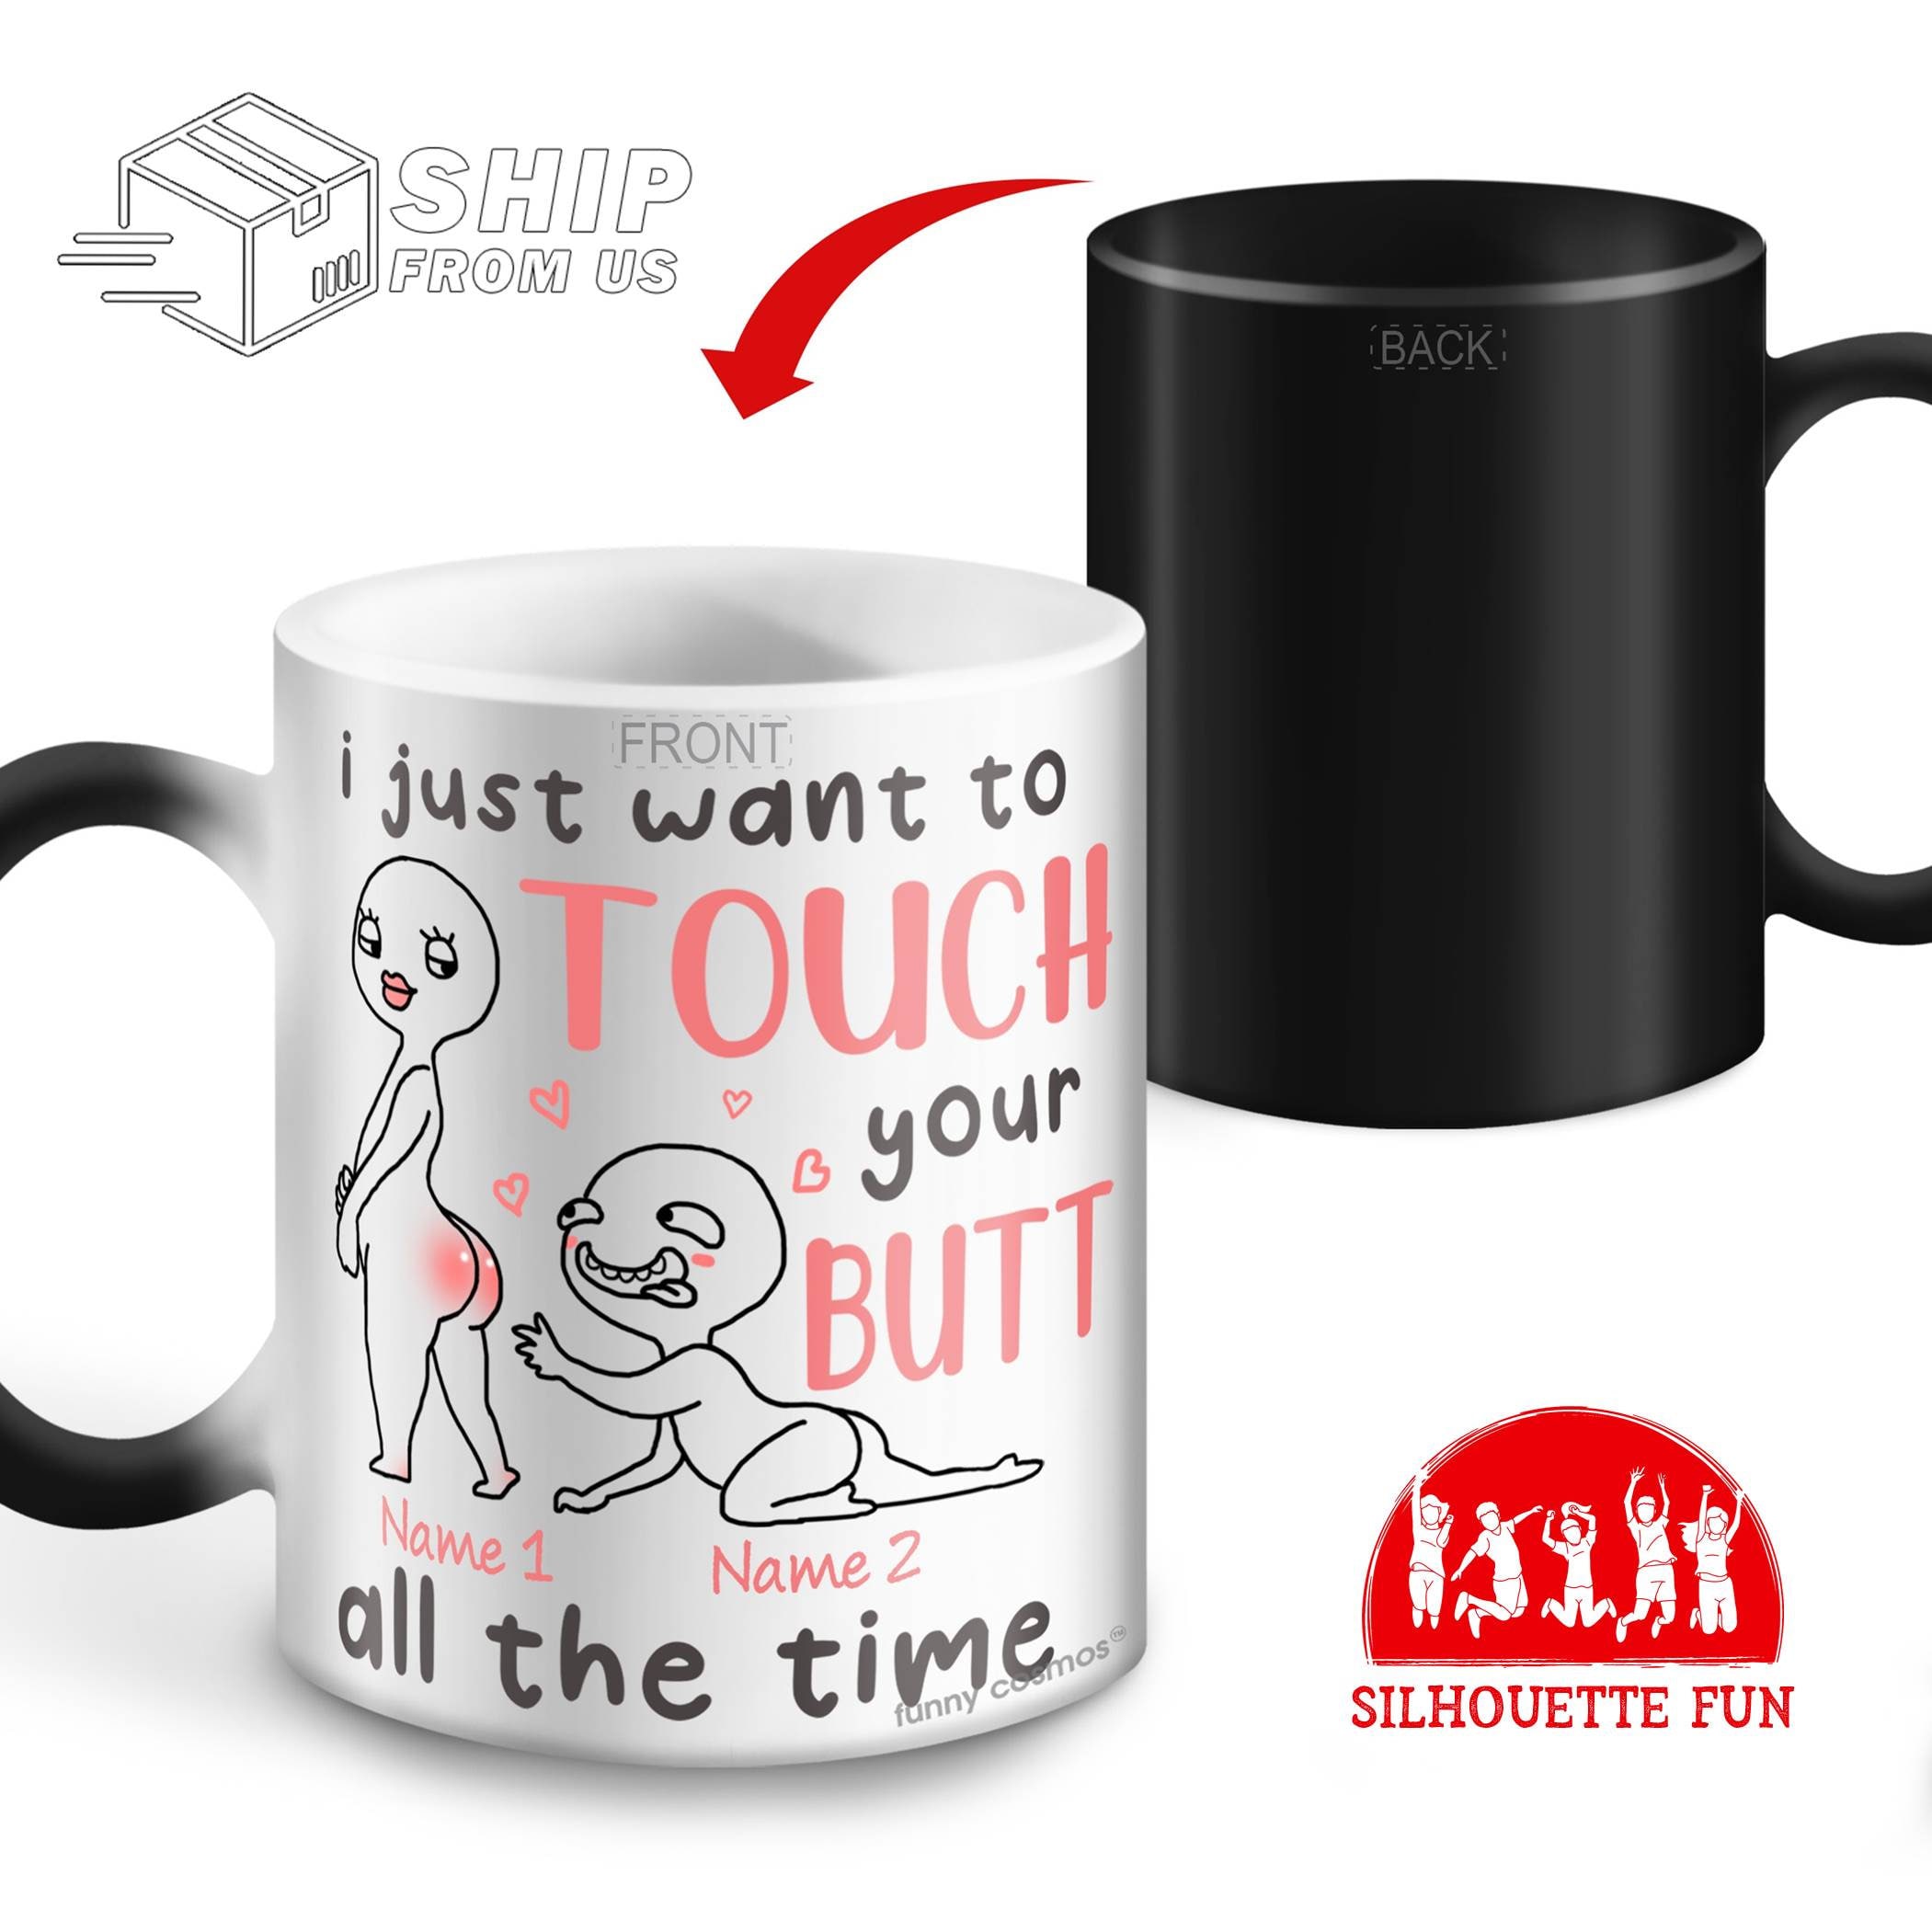 Adore You And Love Your Butt Personalized Couple Tumbler, Gift For Couple 